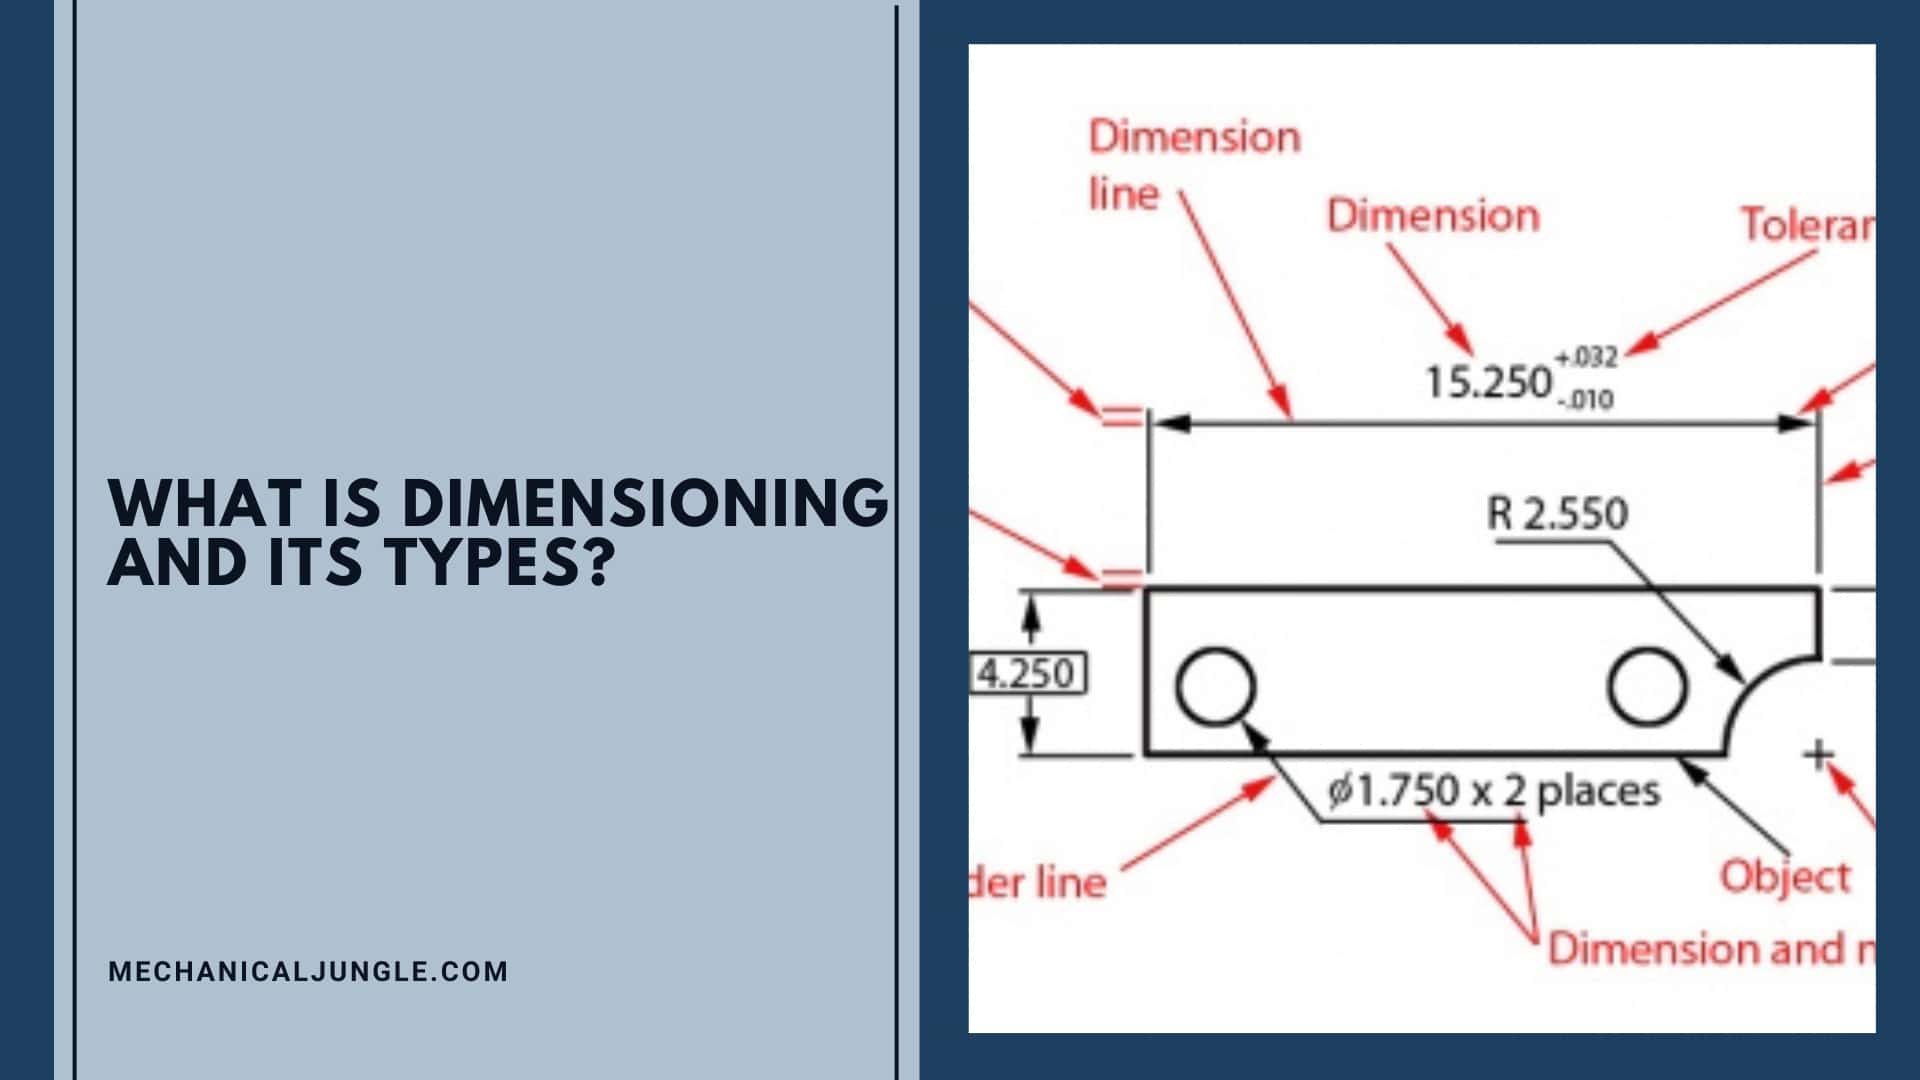 What Is Dimensioning and Its Types?